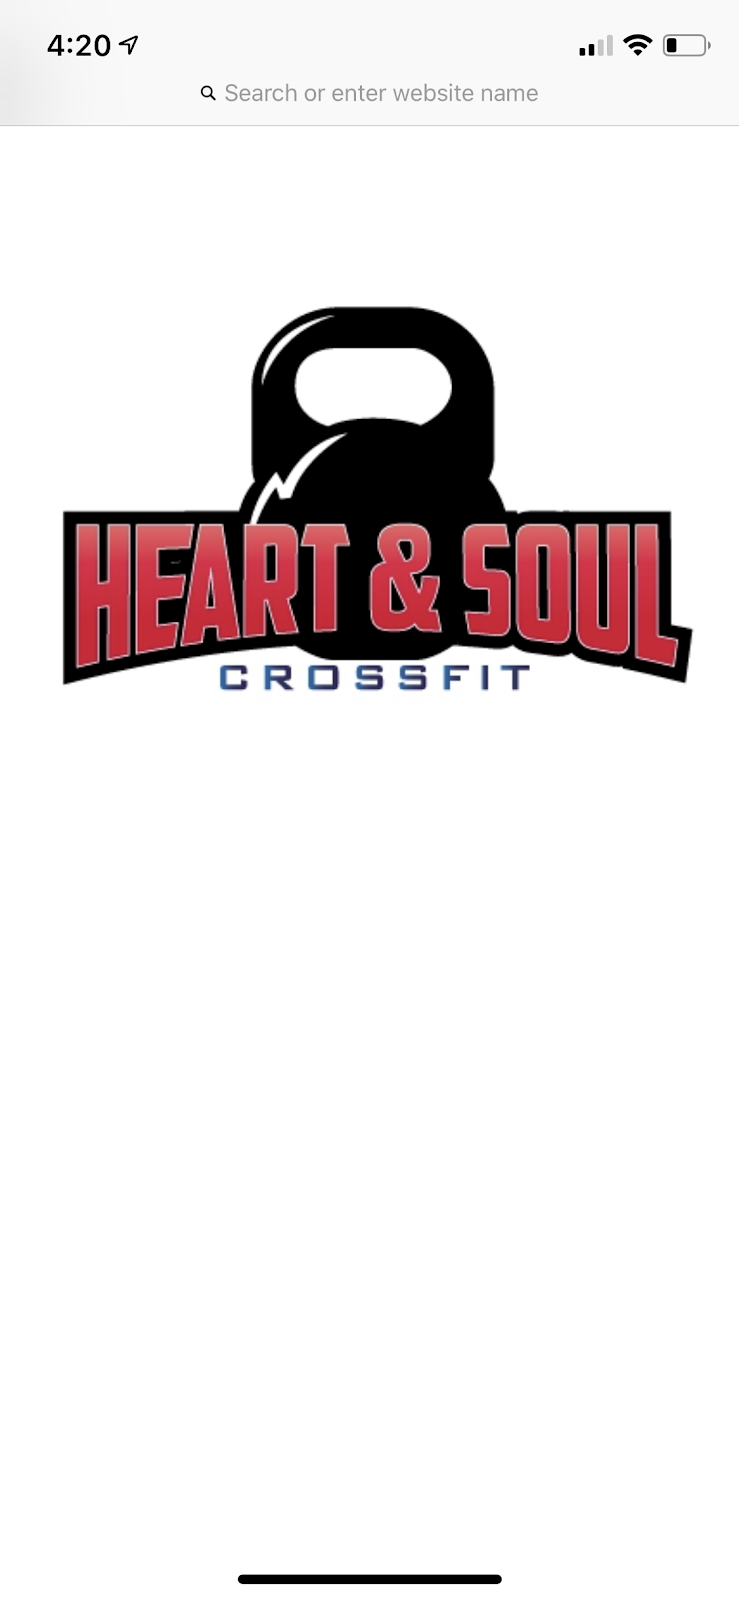 Heart and Soul Crossfit | 531 N 4th St, Denver, PA 17517, USA | Phone: (717) 466-0088